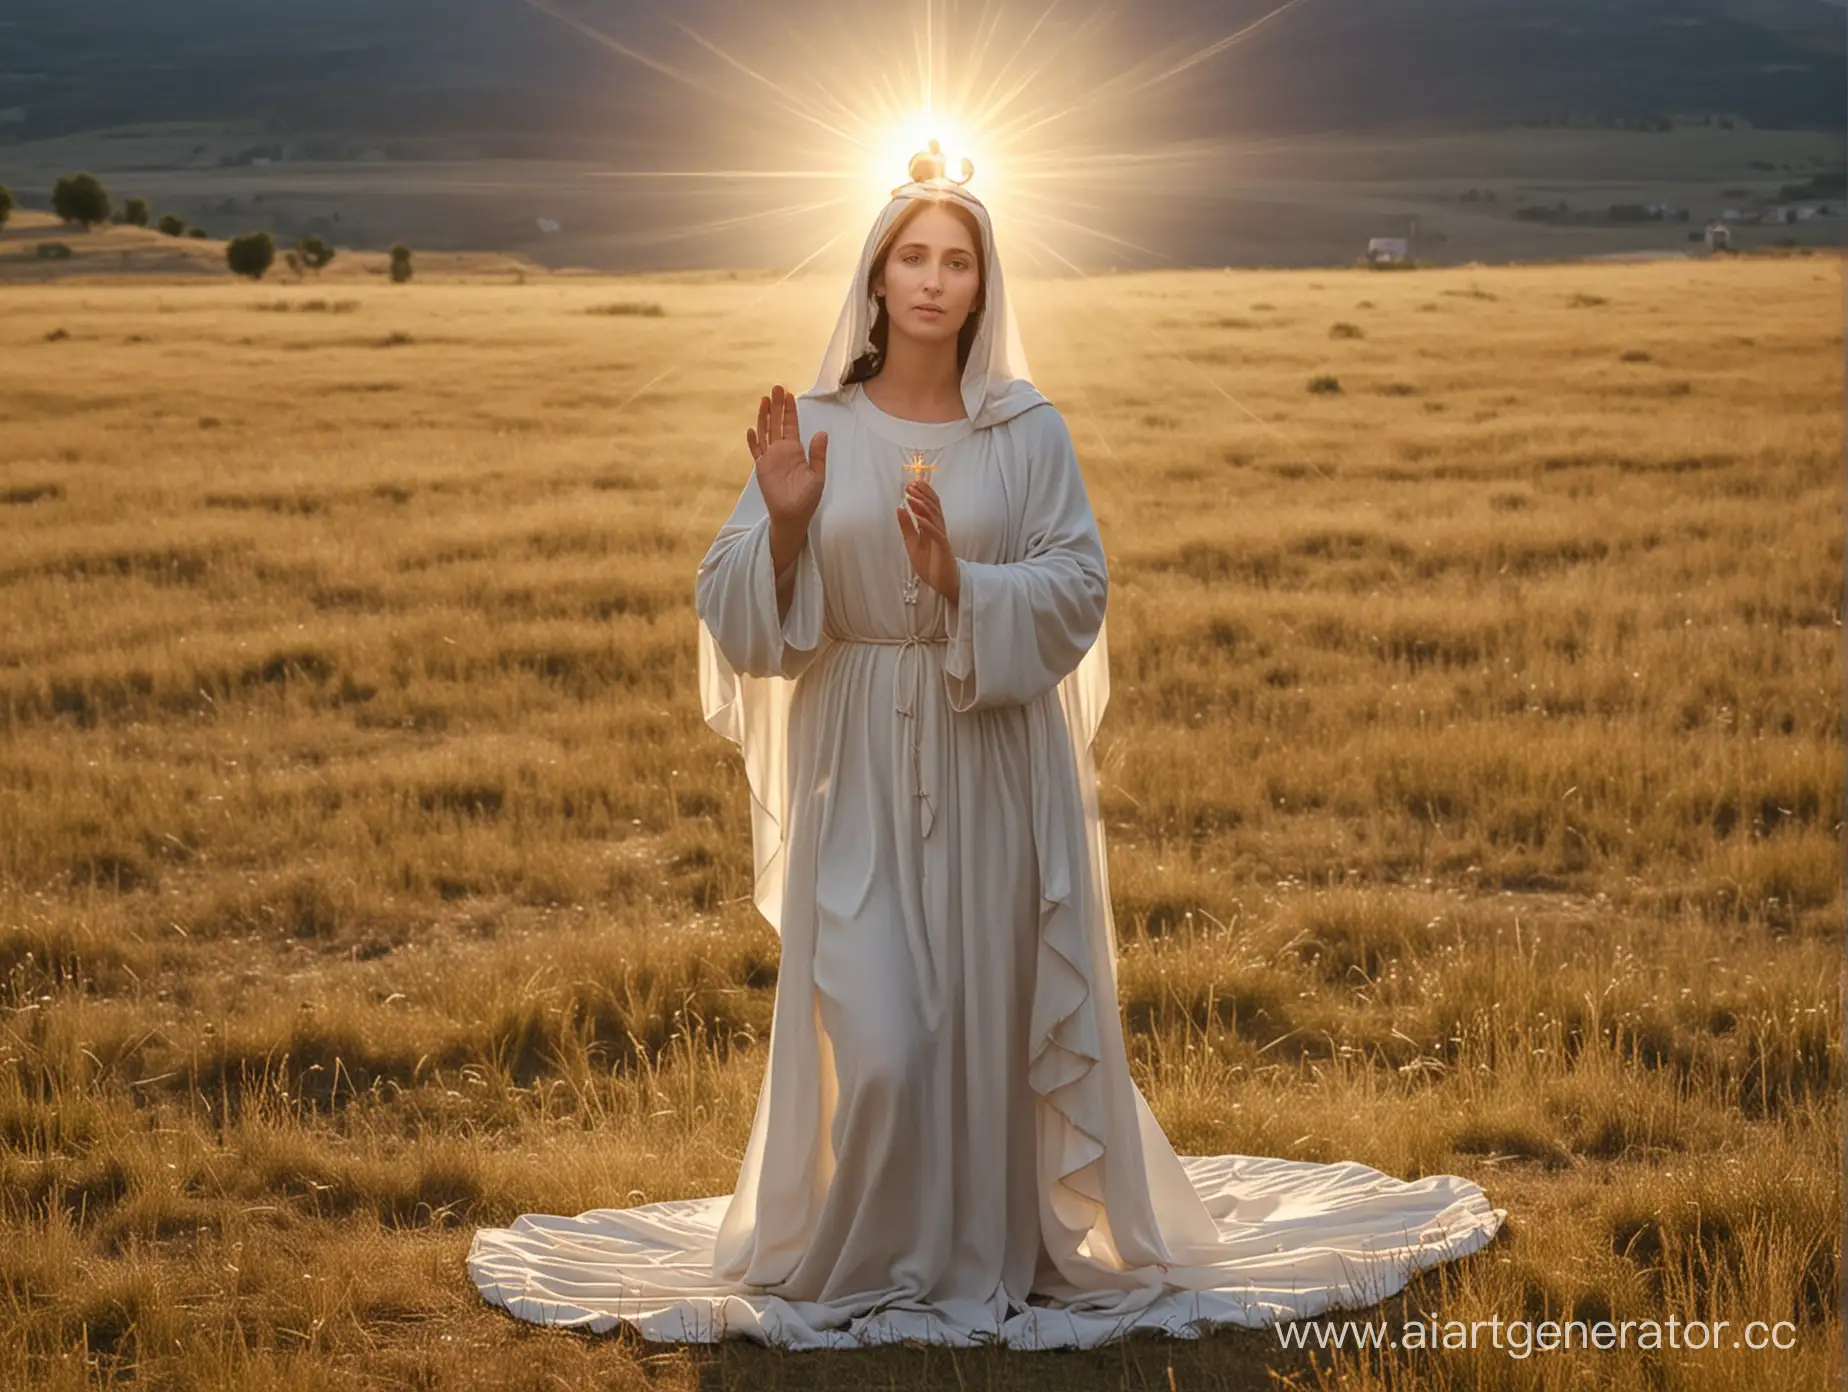 The Mother of God appeared in the middle of the field, the light points to the place with her finger